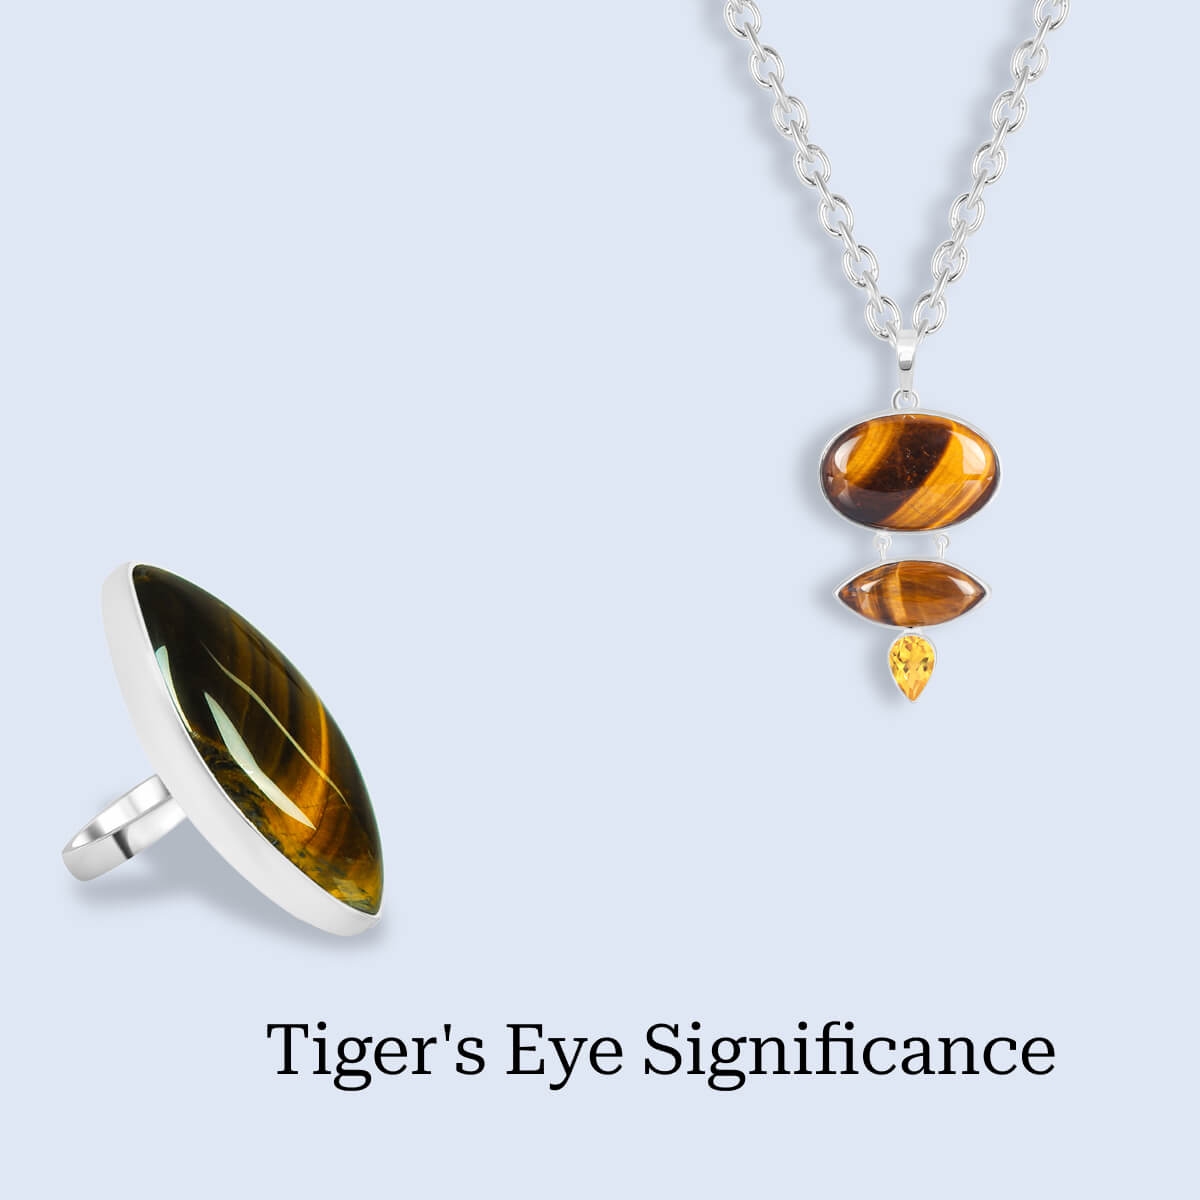 Significance Of Tiger's Eye